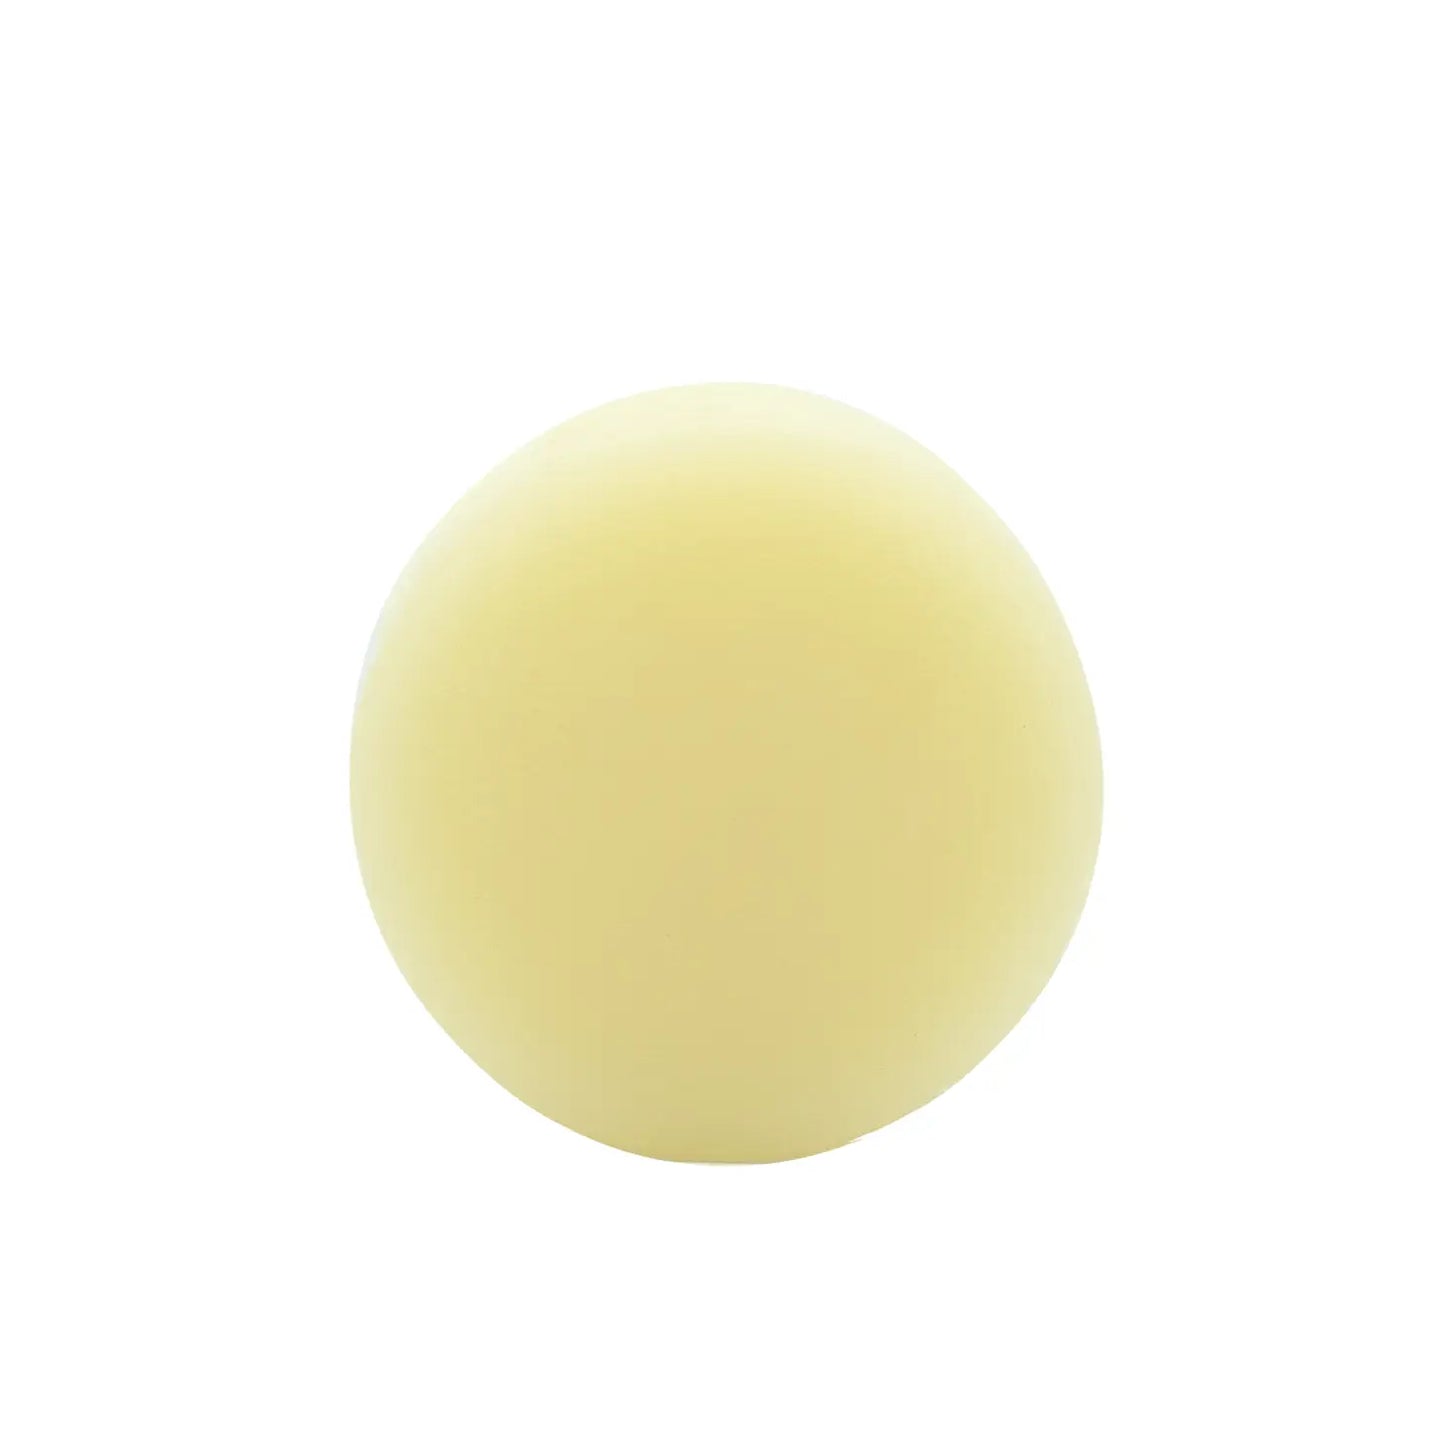 Conditioner Bar - Dry / Curly Hair